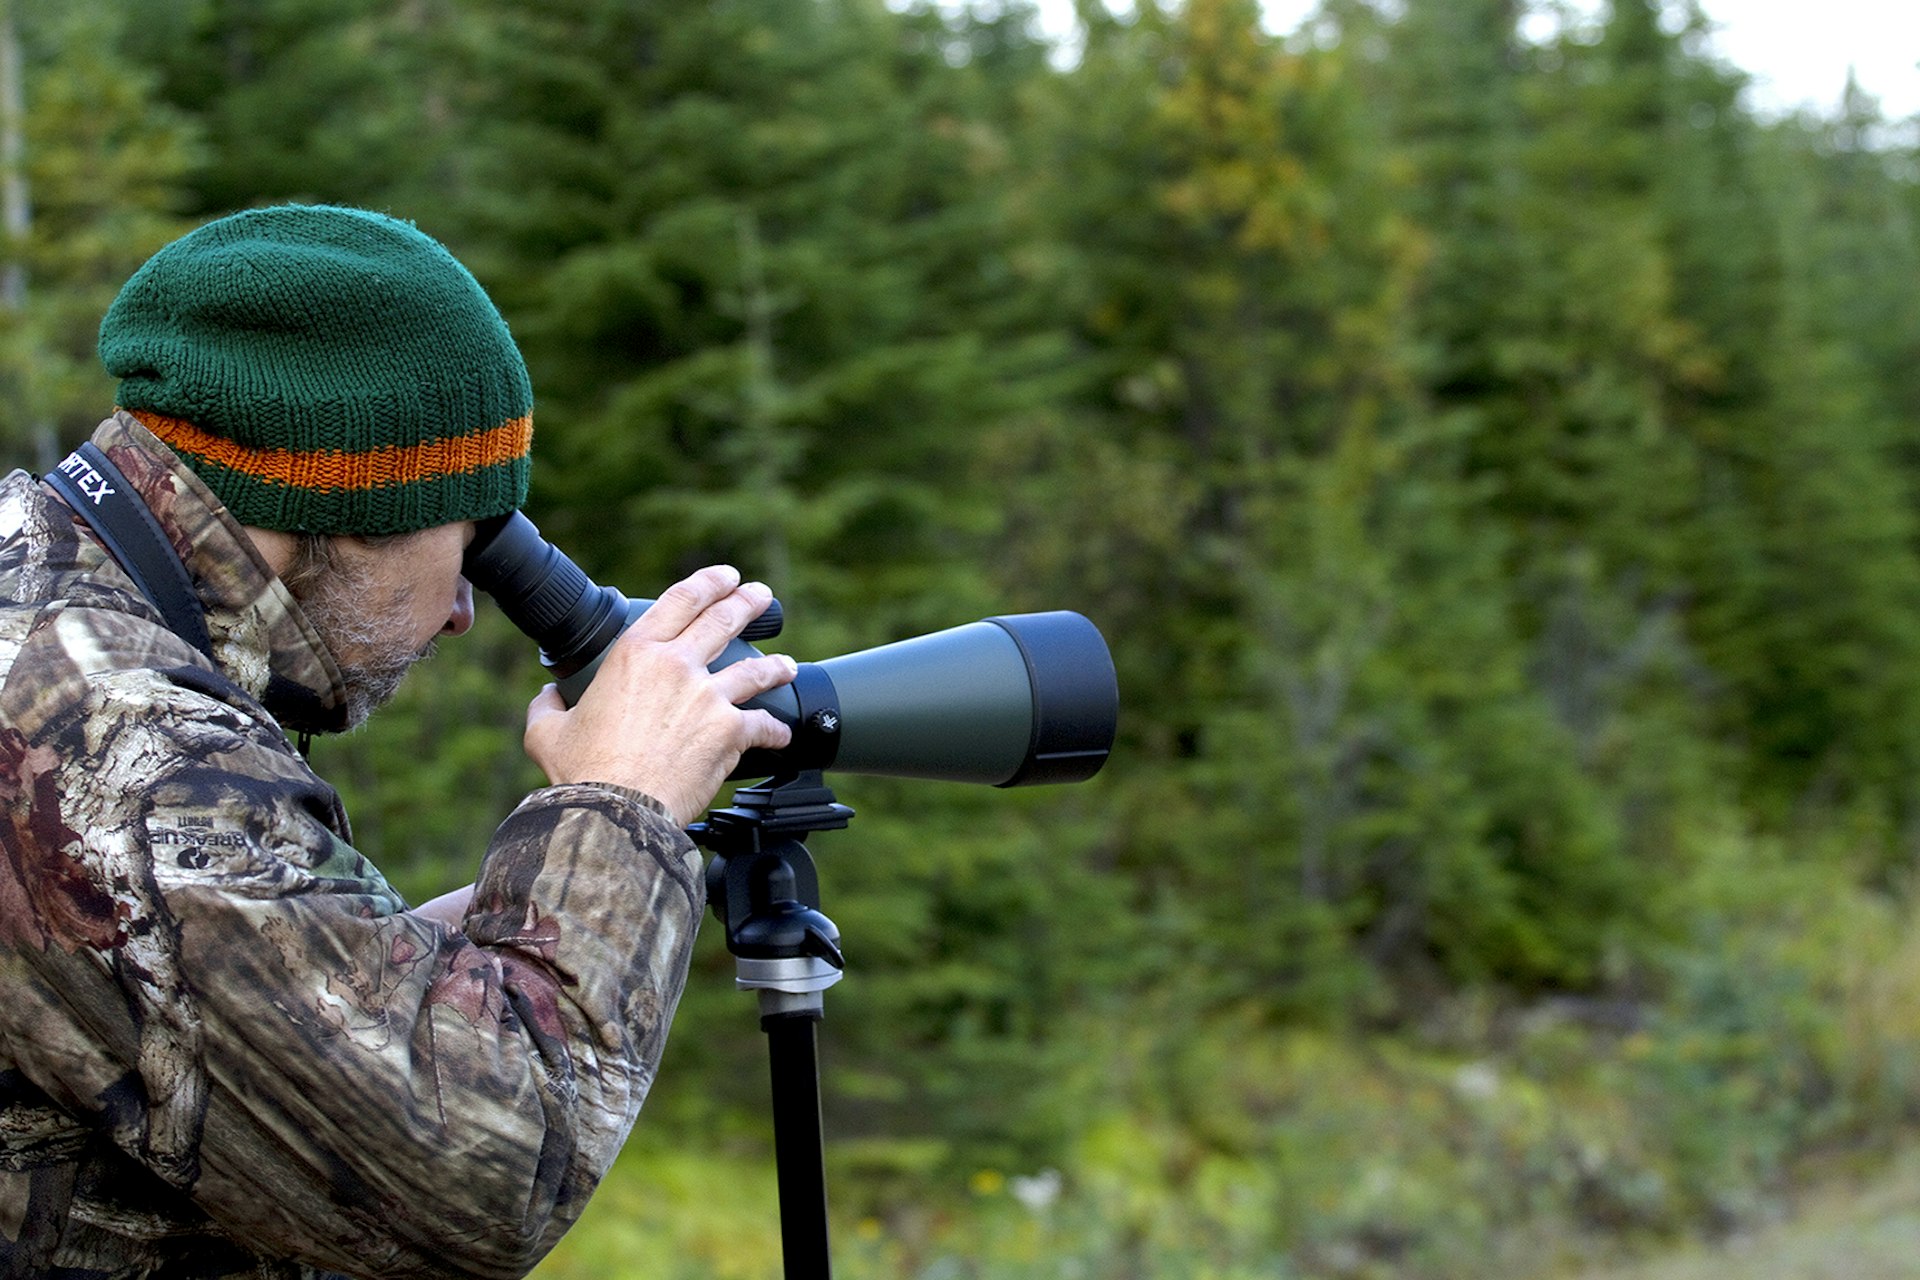 Pierre Vaillancourt on the lookout for moose in the Forêt Montmorency. Image by Kerry Christiani / Lonely Planet